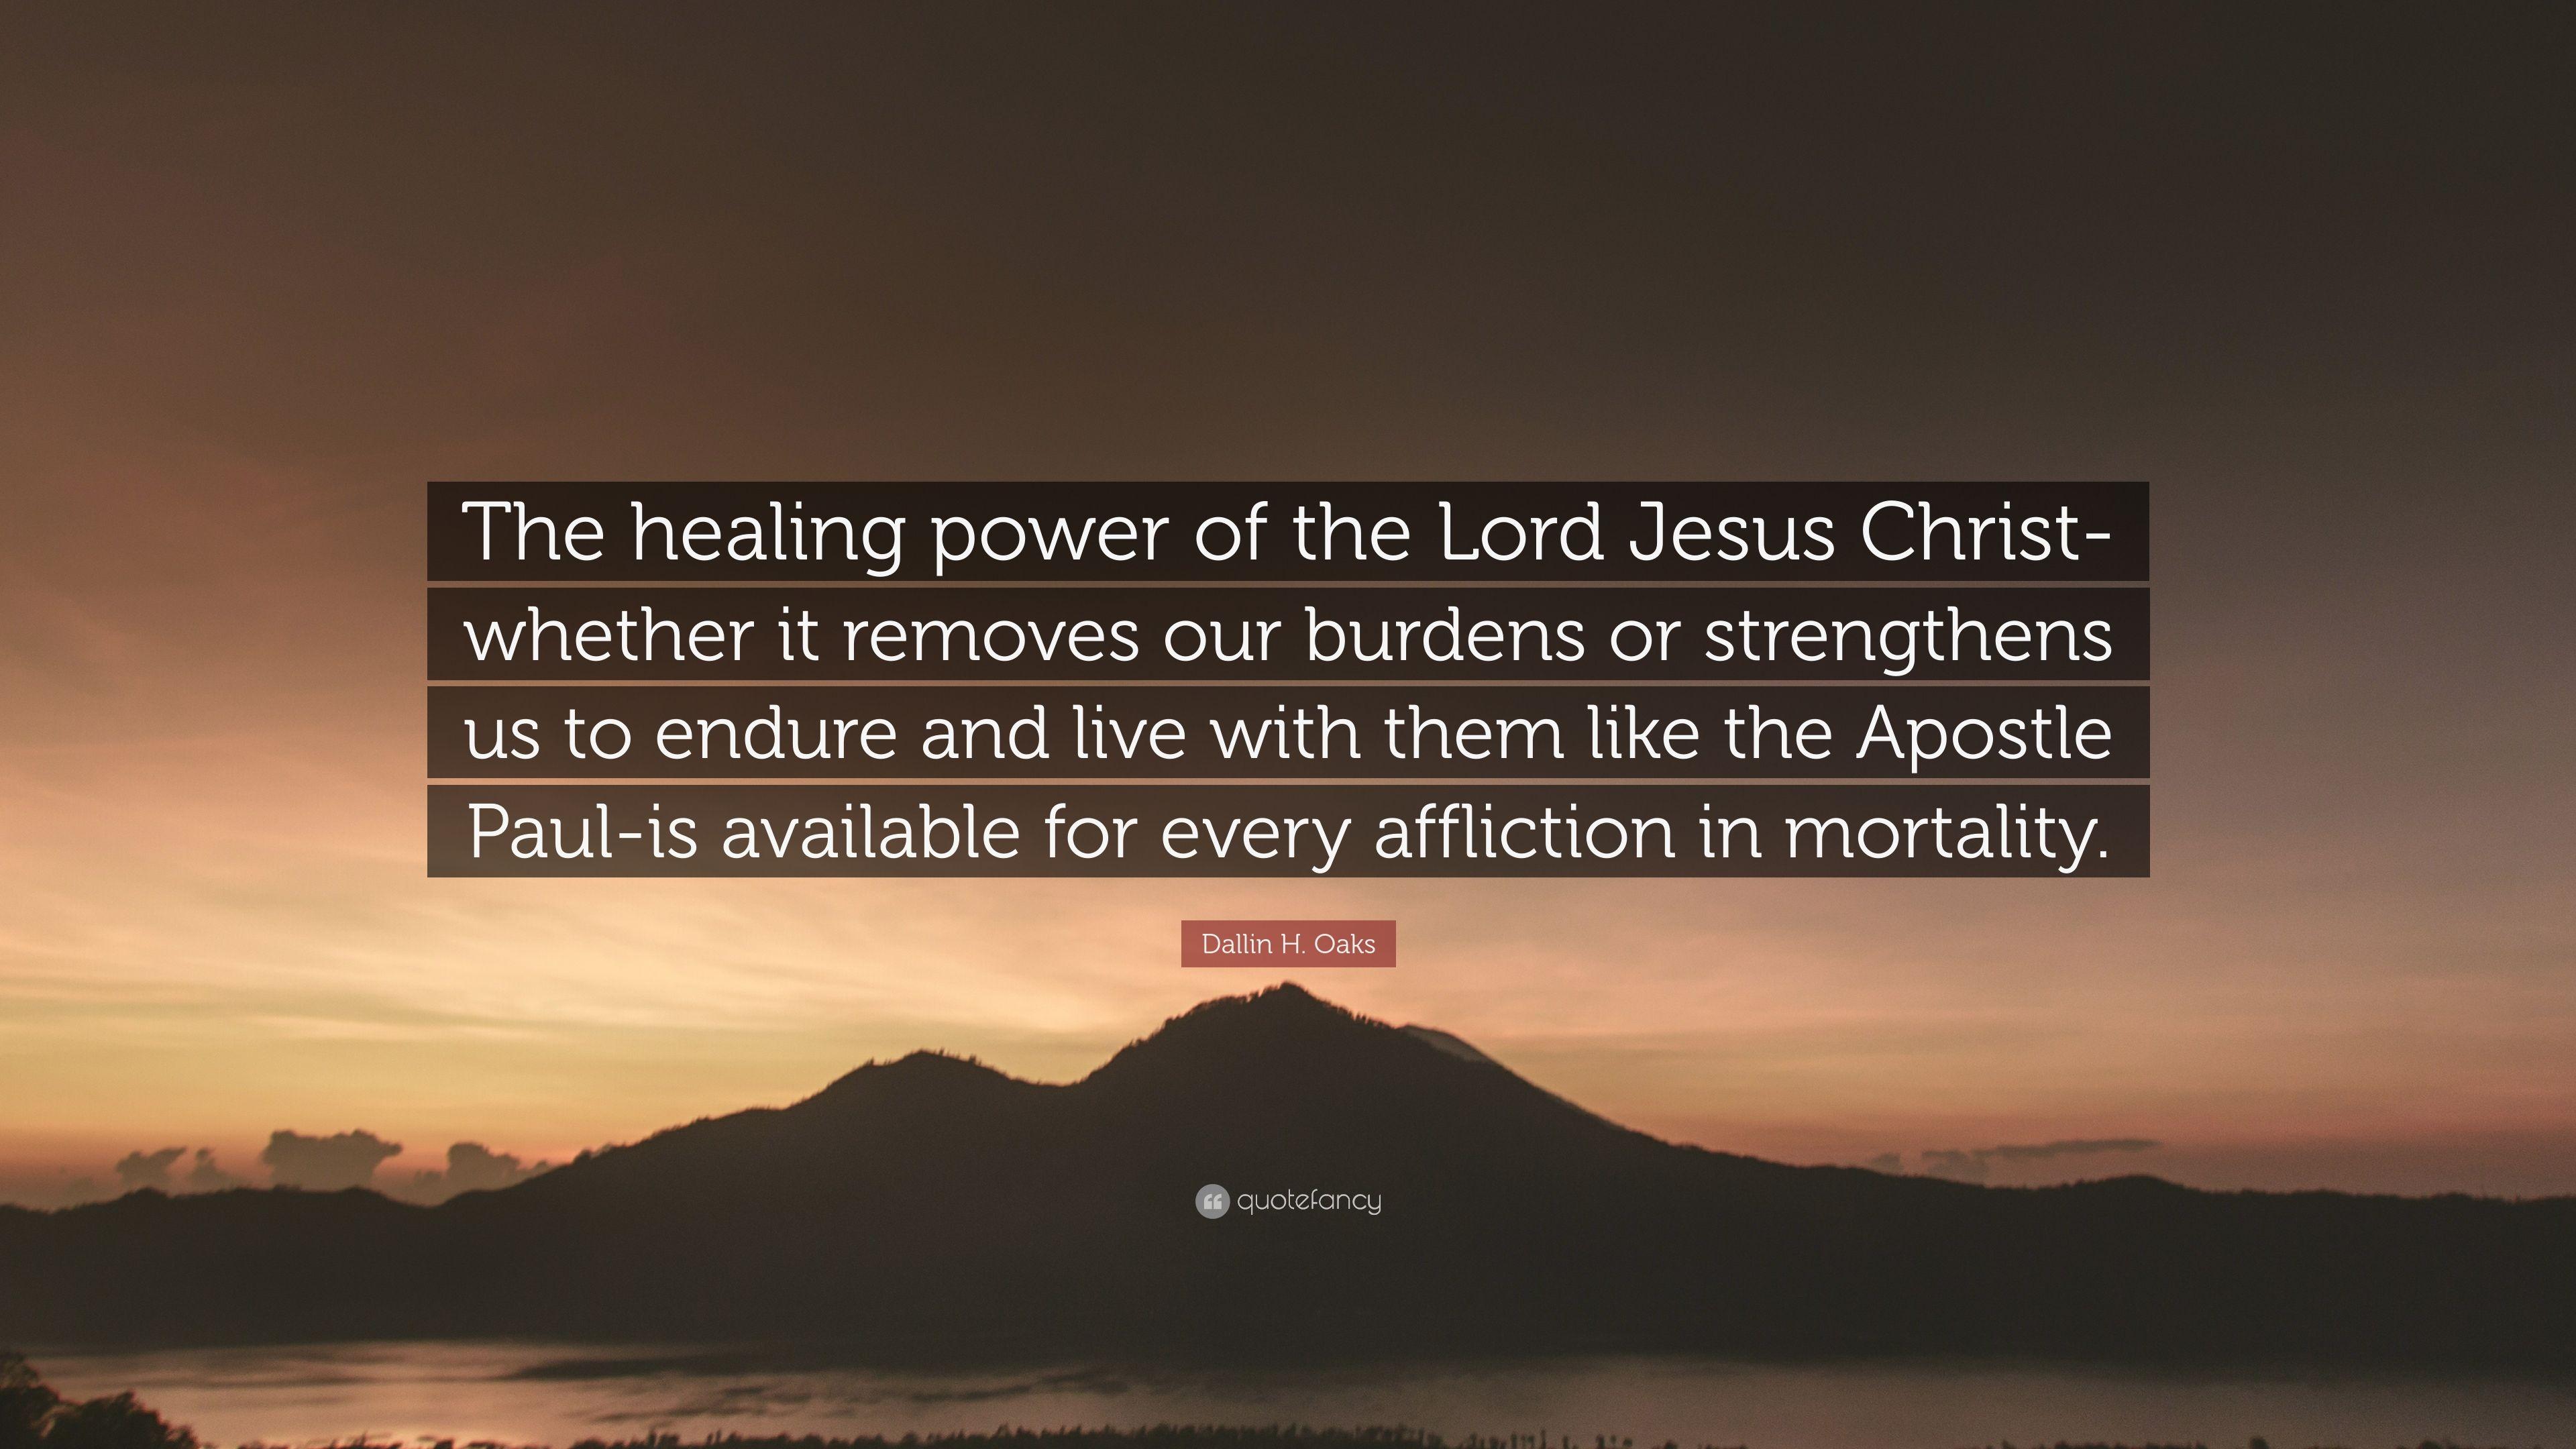 Dallin H. Oaks Quote: “The healing power of the Lord Jesus Christ